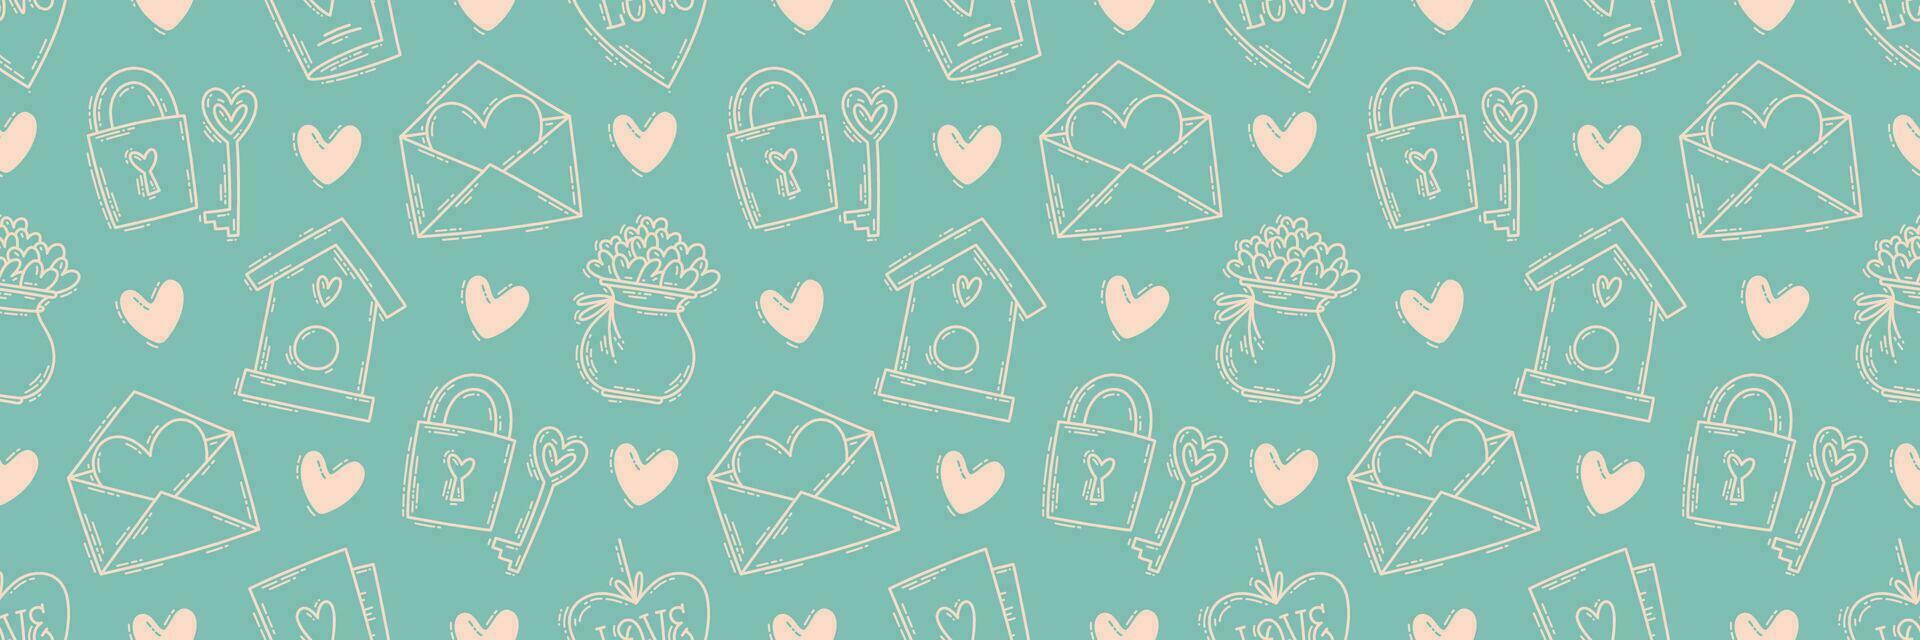 The love theme doodle style seamless pattern, Valentines Day hand-drawn color icons with a simple engraving retro effect. Romantic mood, cute symbols and elements backgrounds collection. vector